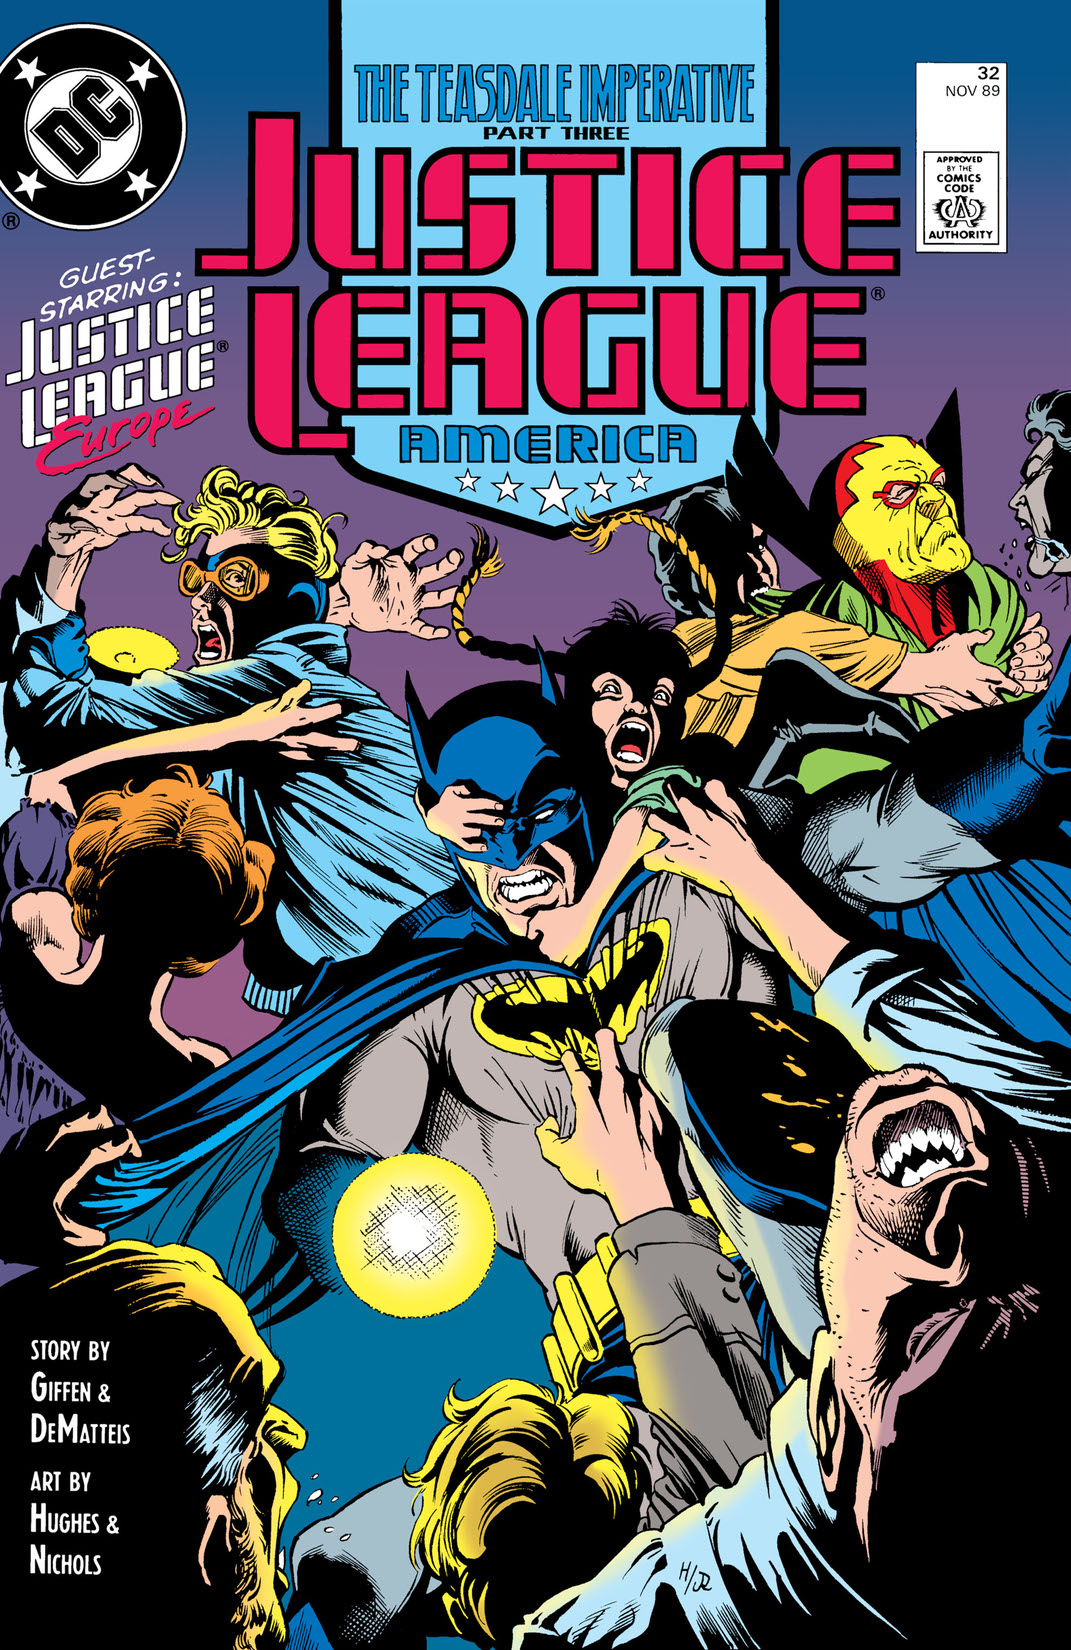 Justice League America (1987-1996) #32 preview images